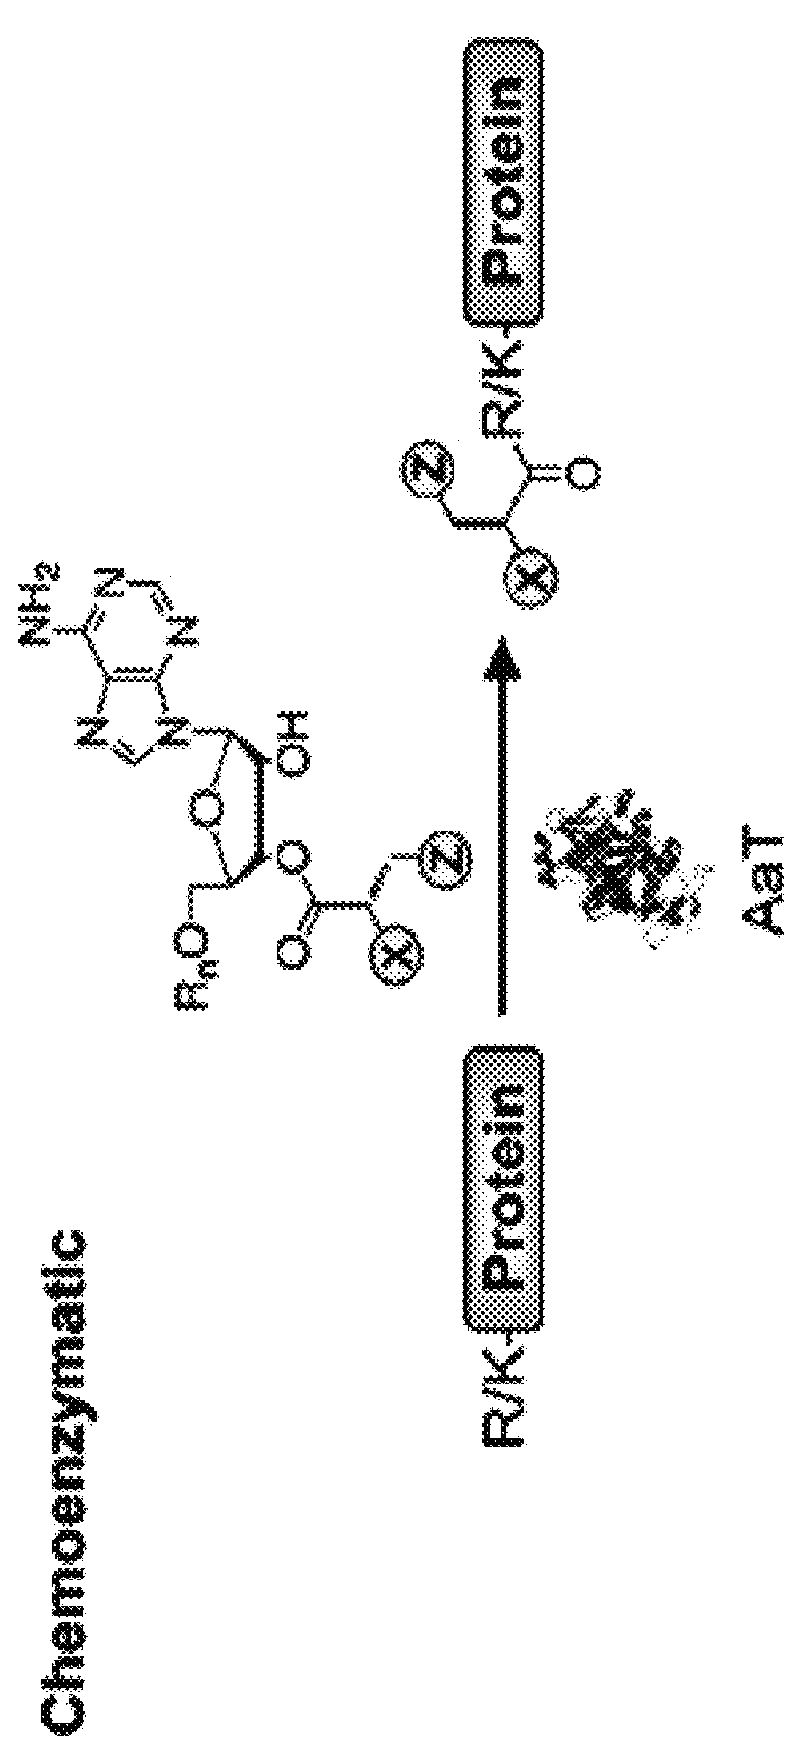 Methods of modifying N-termini of a peptide or protein using transferases